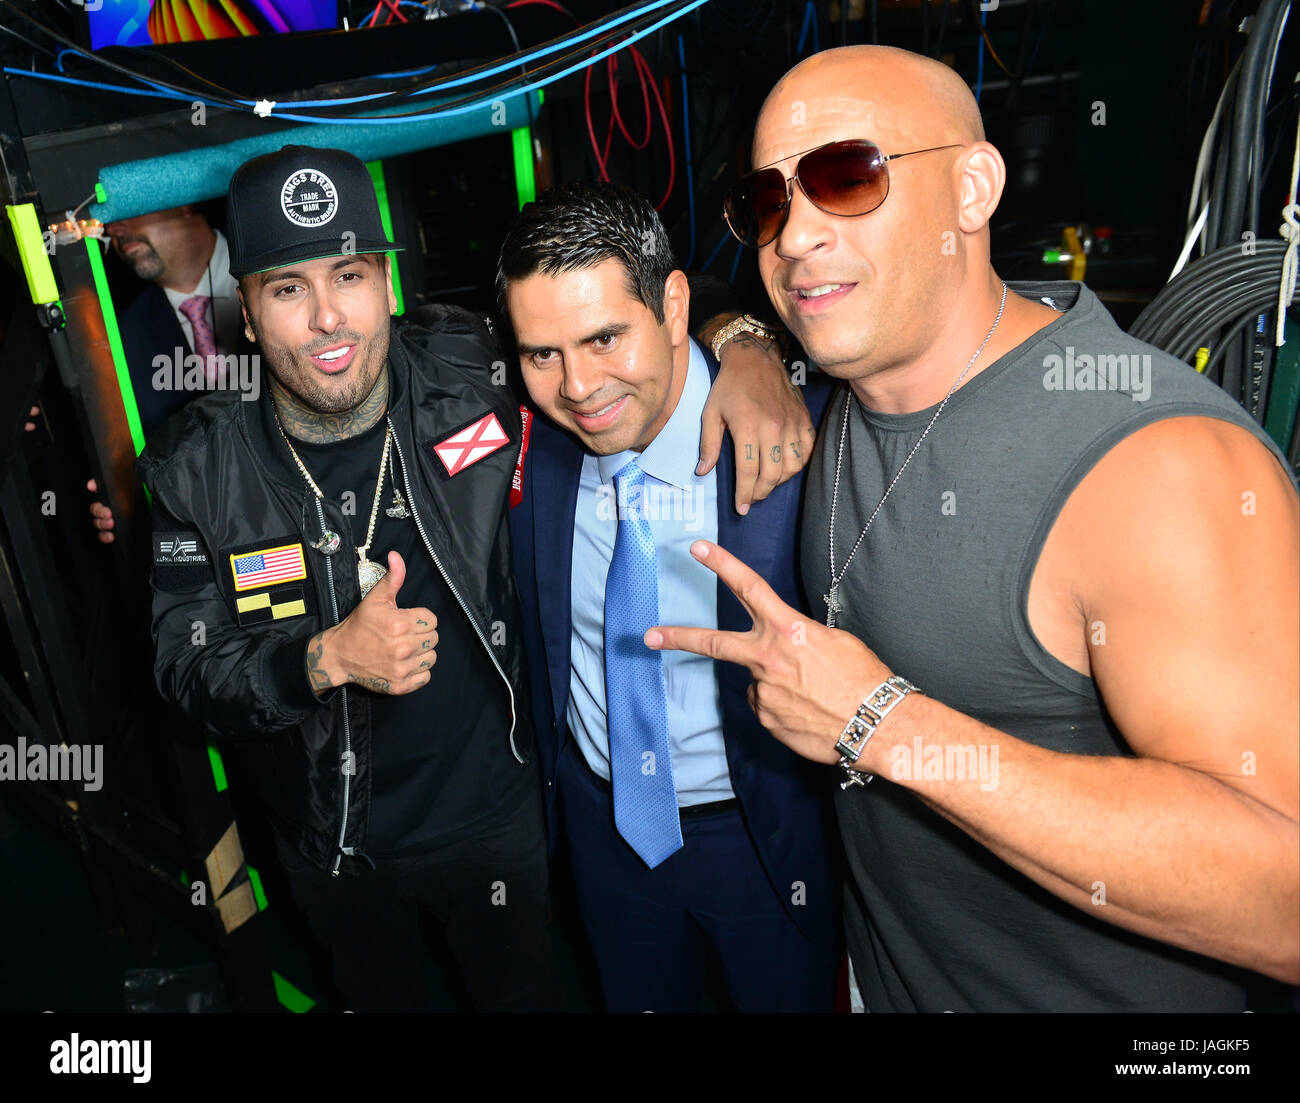 Billboard Latin Music Awards - Arrivals Featuring: Nicky Jam, Vin Diesel  Where: Coral Gables, Florida, United States When: 27 Apr 2017 Credit: JLN  Photography/WENN.com Stock Photo - Alamy